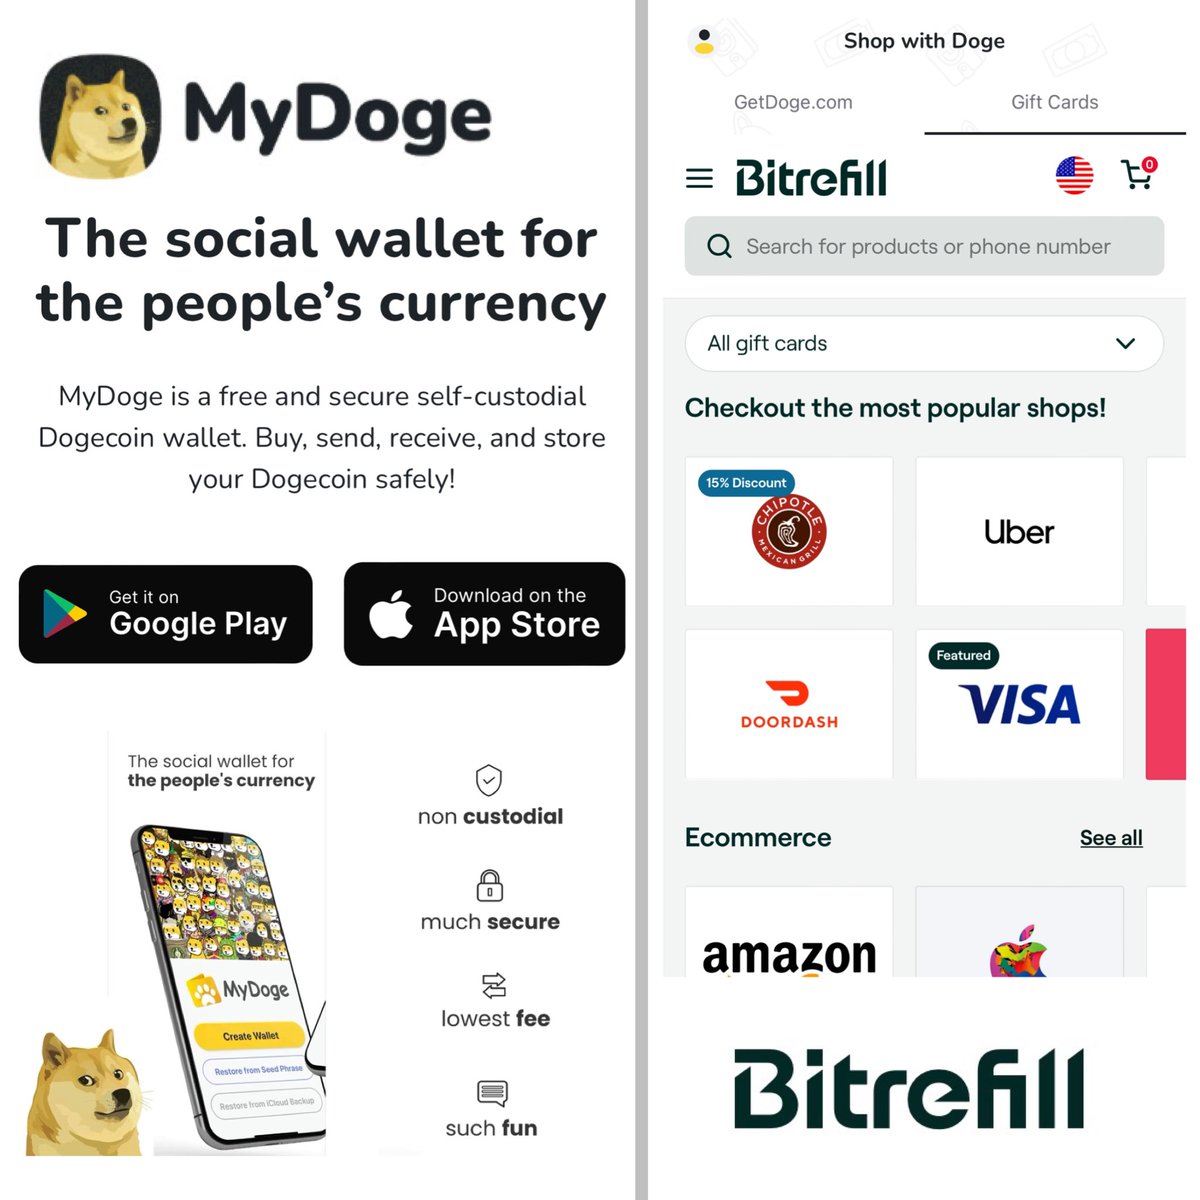 The MyDoge wallet has released a new update that contains Gift Cards from so many BIG retailers.  This means you can use your #Dogecoin at almost any retailer. You can even get a Visa Gift card, which is huge.  MyDoge and @bitrefill have partnered to make this possible  The…